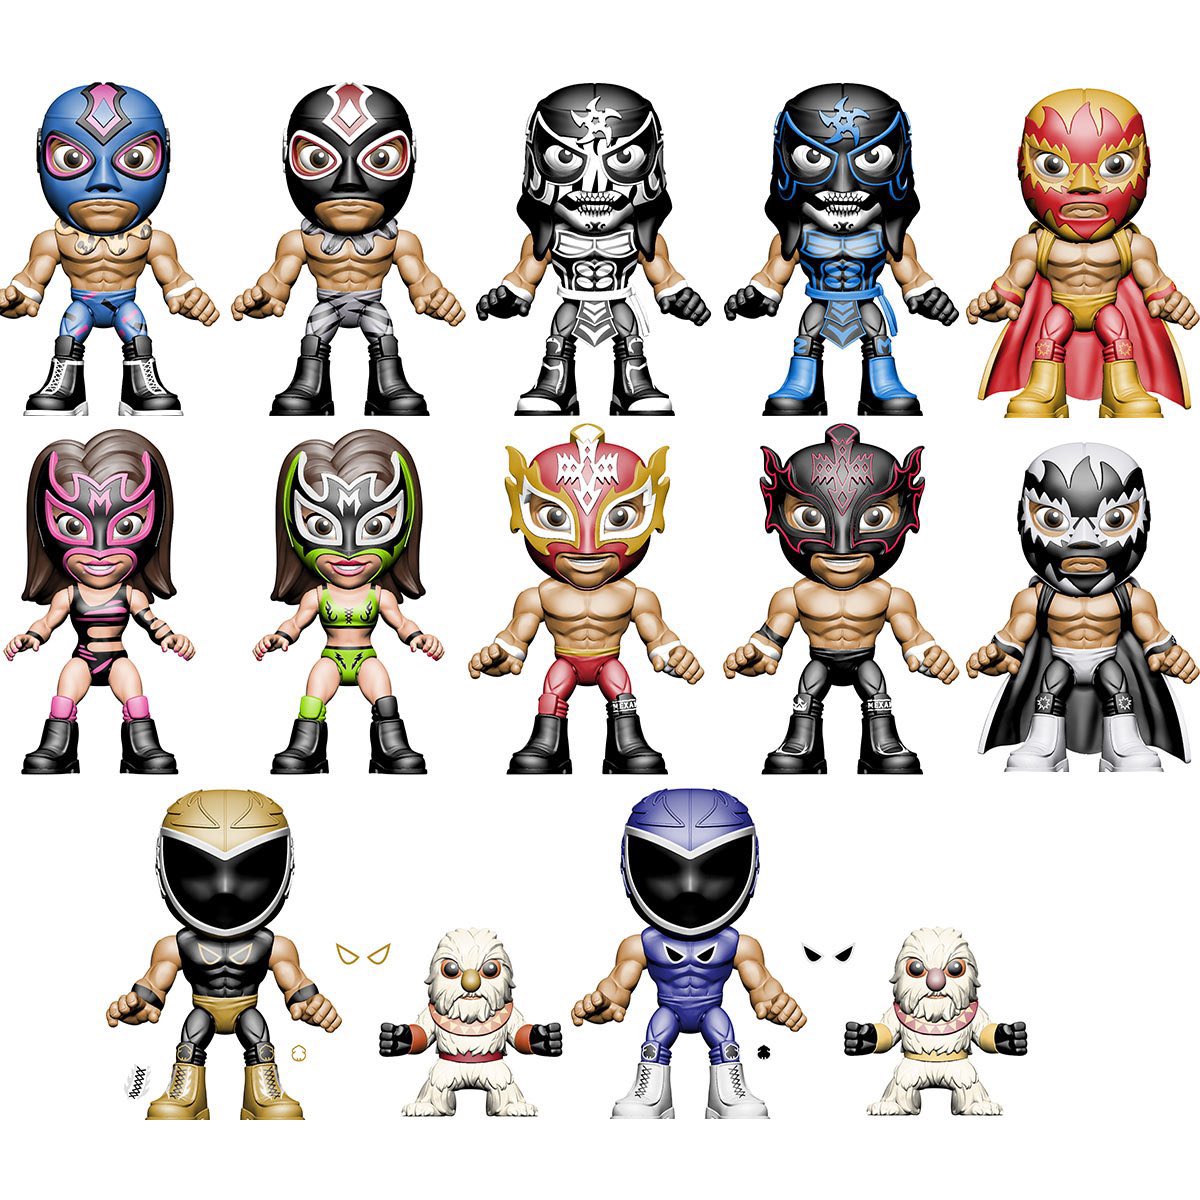 Welcome to the most adorable Lucha arena ever! 

Luchacitos feature your favorite luchadors with 5 points of articulation and 2x costume choices. 

The possible luchadors include:
Penta Zero Miedo
Rey Fenix
Konnan
Lady Maravilla
Solar
Tinieblas Jr! 

With store.realrasslin.net…